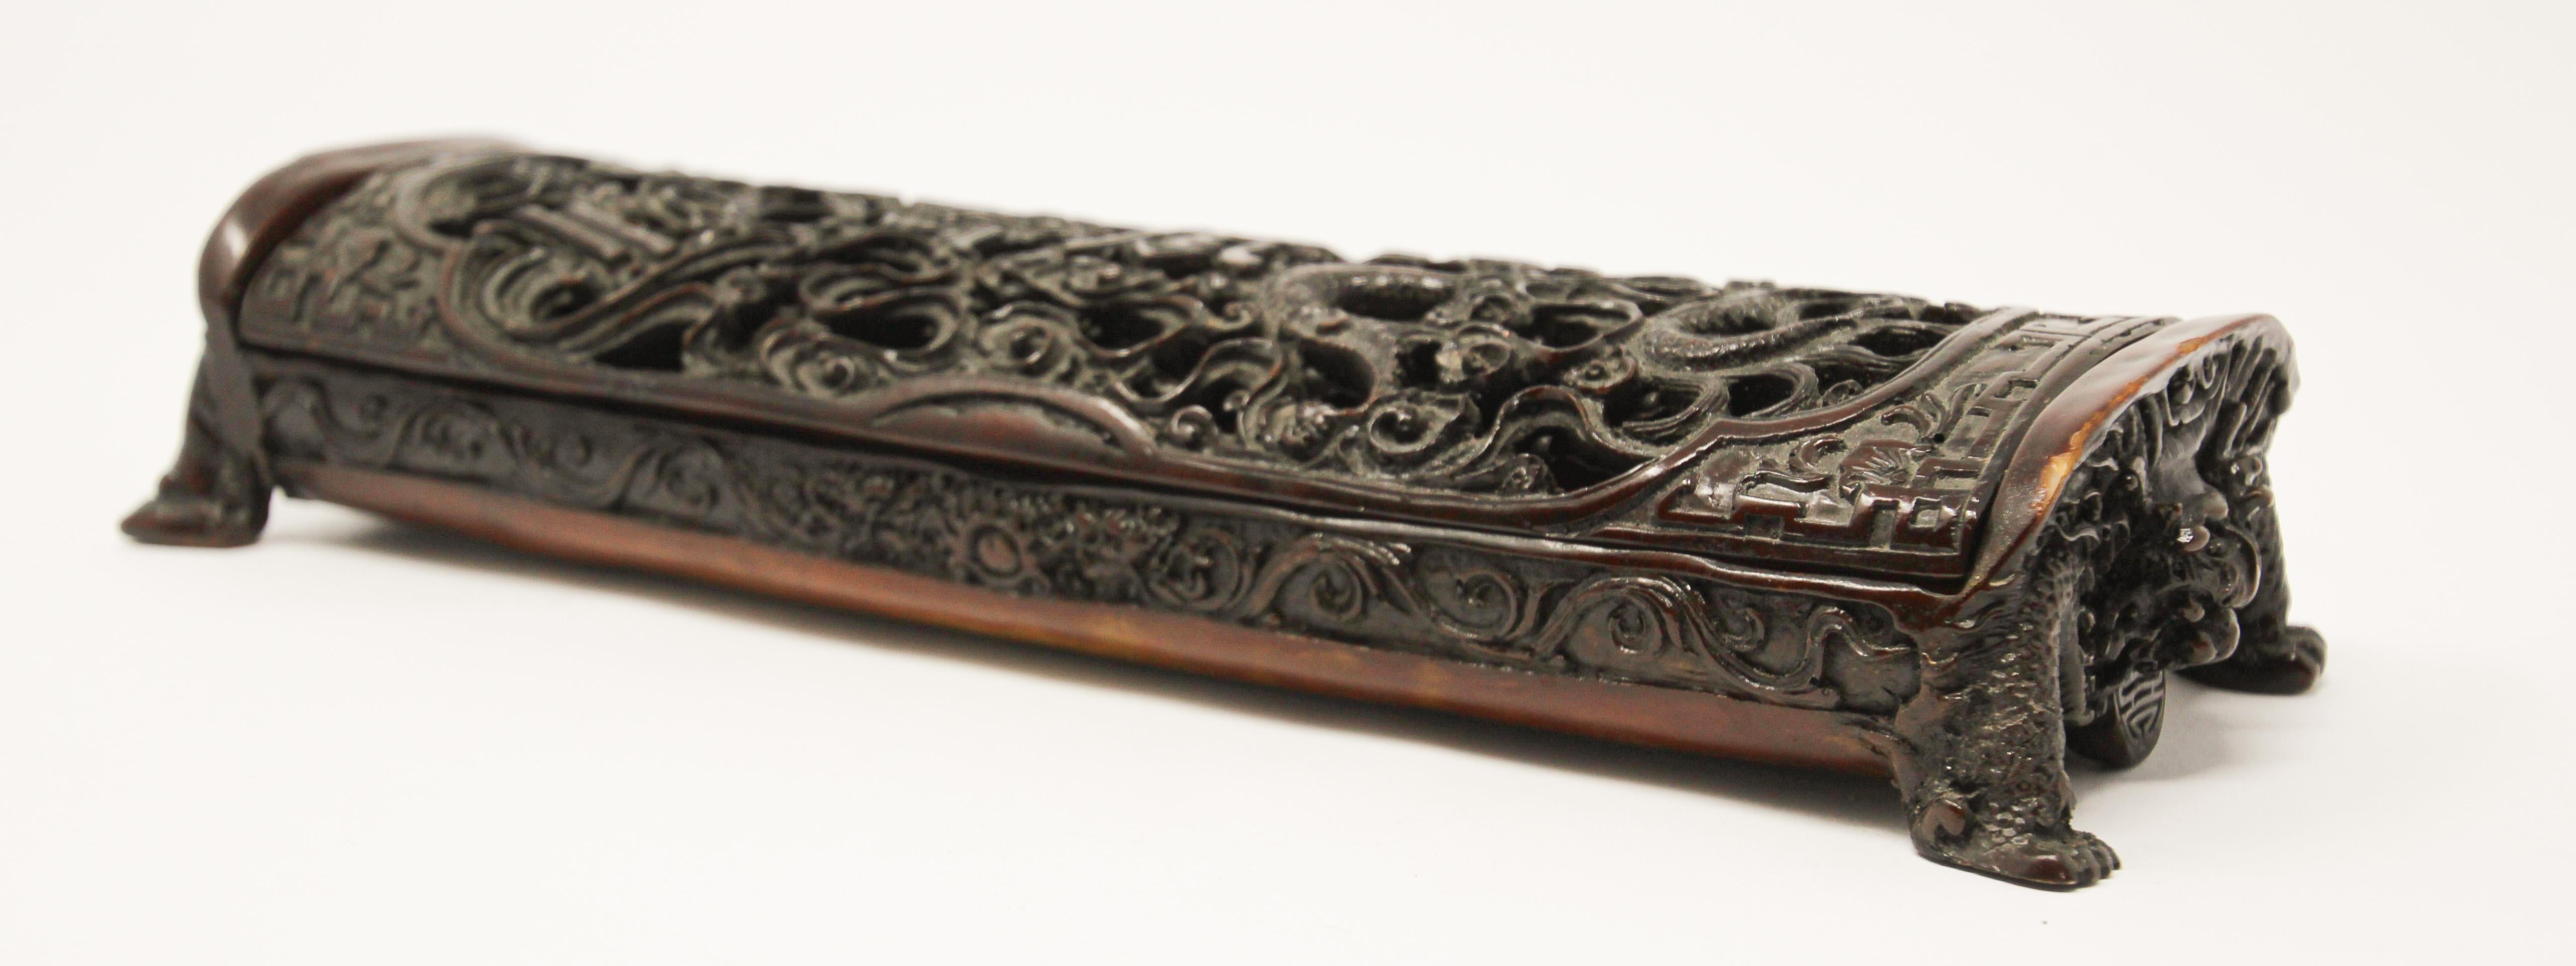 Chinese Export Chinese Footed Box with Dragon Motifs